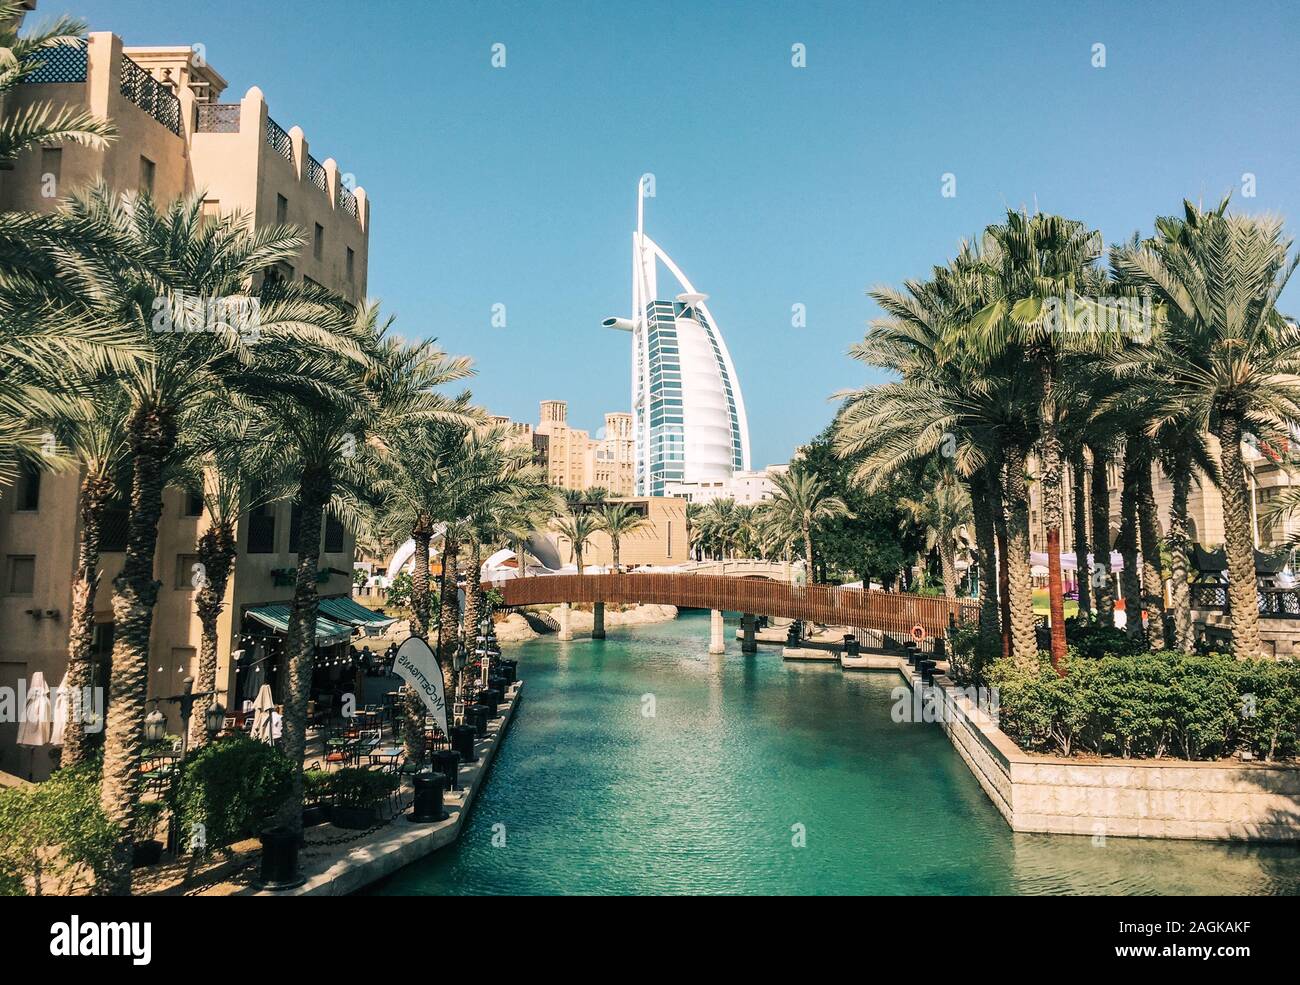 Dubai, UAE - Dec 9, 2018. View of Burj Al Arab hotel from Madinat Jumeirah. Madinat is a luxury resort which includes hotels and souk covering an area Stock Photo